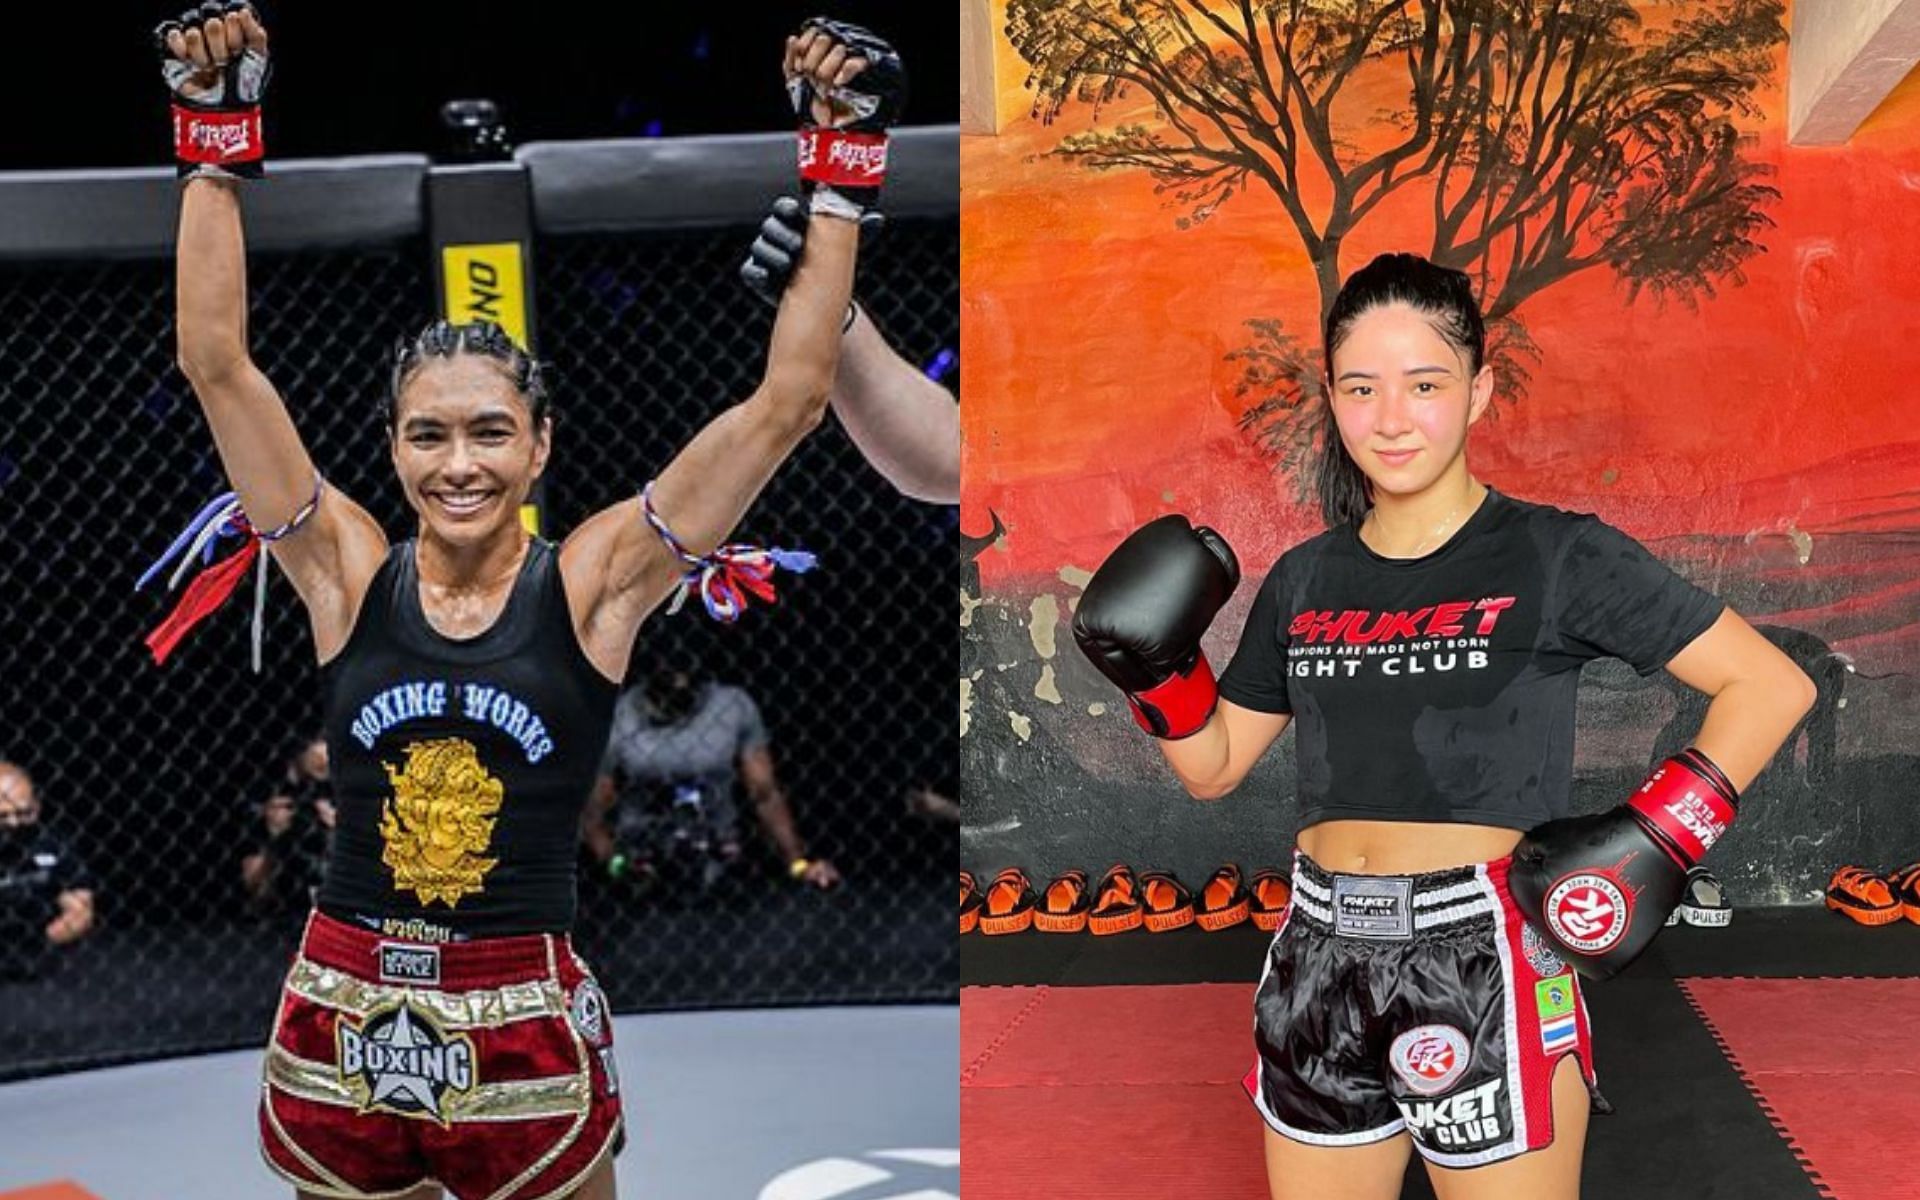 Janet &quot;JT&quot; Todd (left) and Allycia Rodrigues (right) [Credit: One Championship and Instagram @allycia_phuketfightclub]